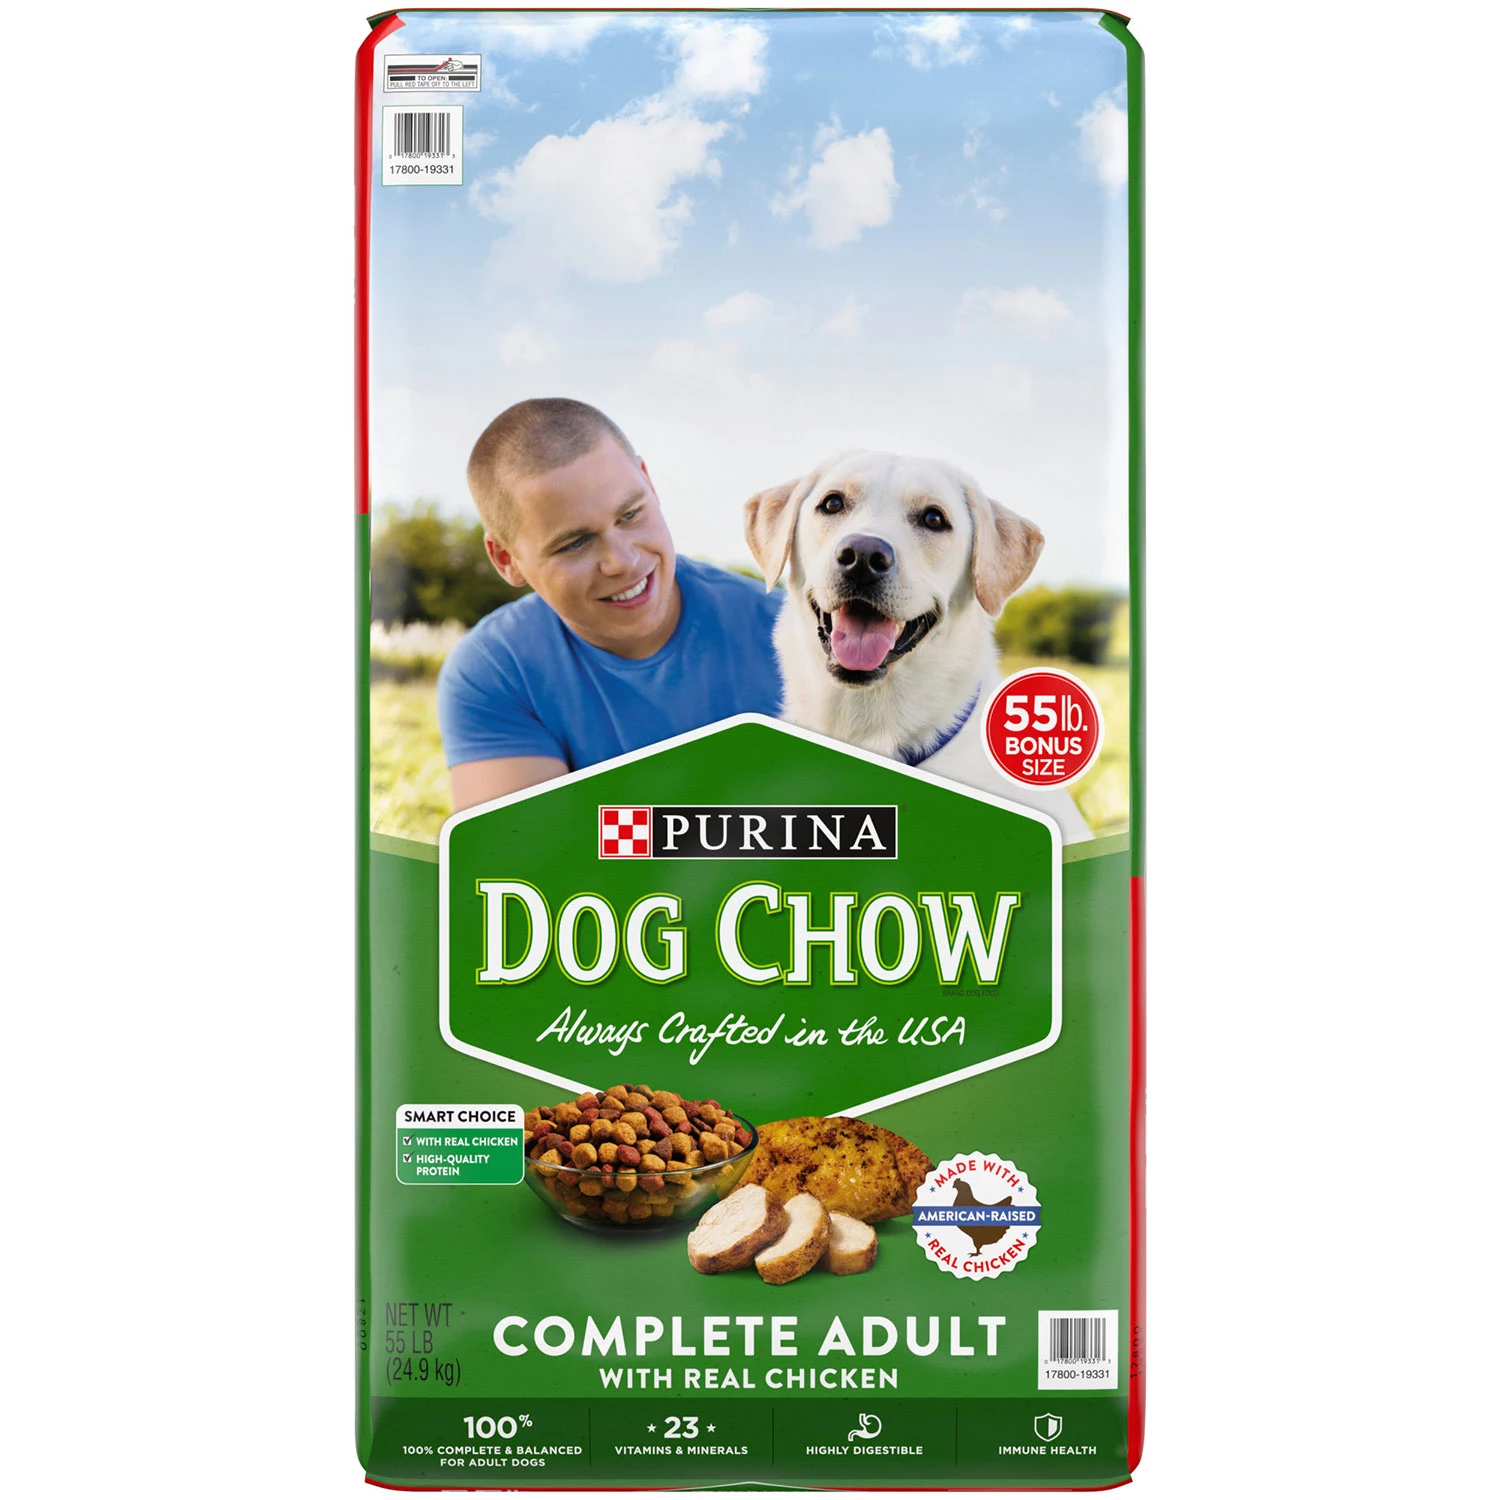 Purina Dog Chow Dry Dog Food, Complete Adult with Real Chicken (55 lb.)